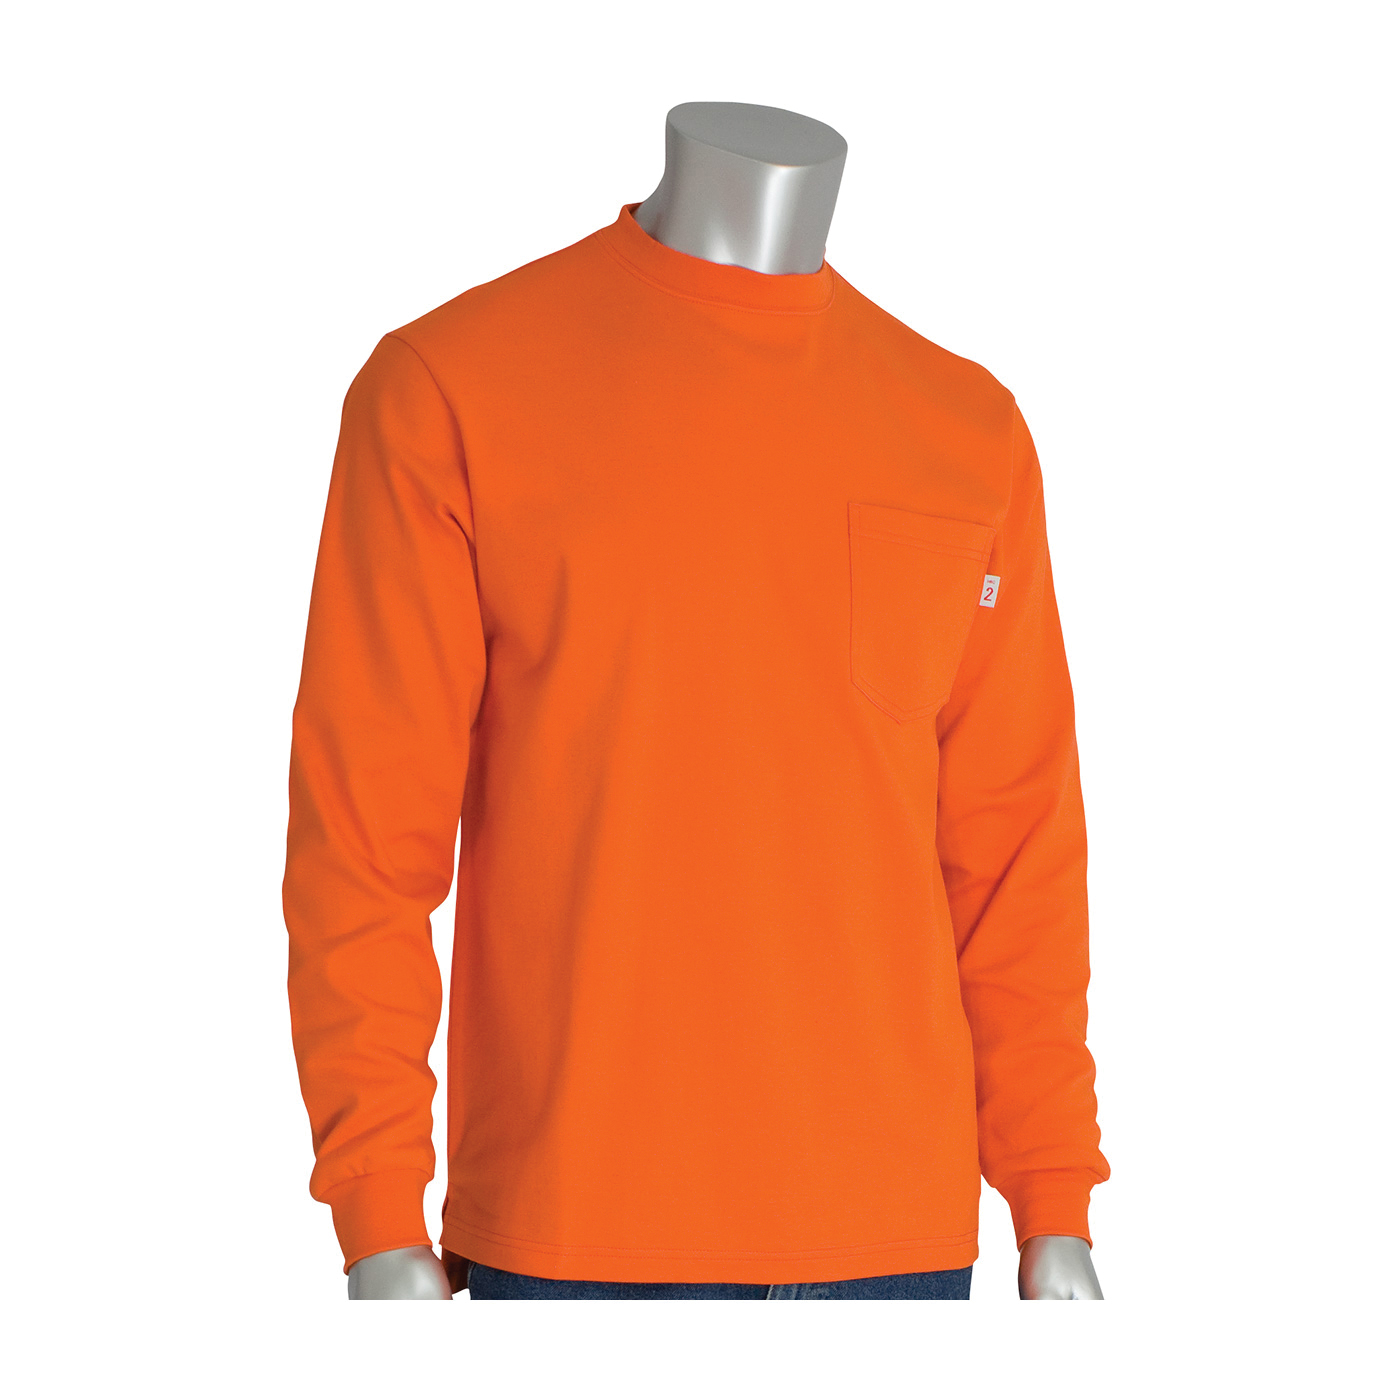 PIP® 385-FRLS-(OR)-M Arc and Flame-Resistant Long Sleeve T-Shirt, M, Orange, Cotton Interlock Knit, 31 in L